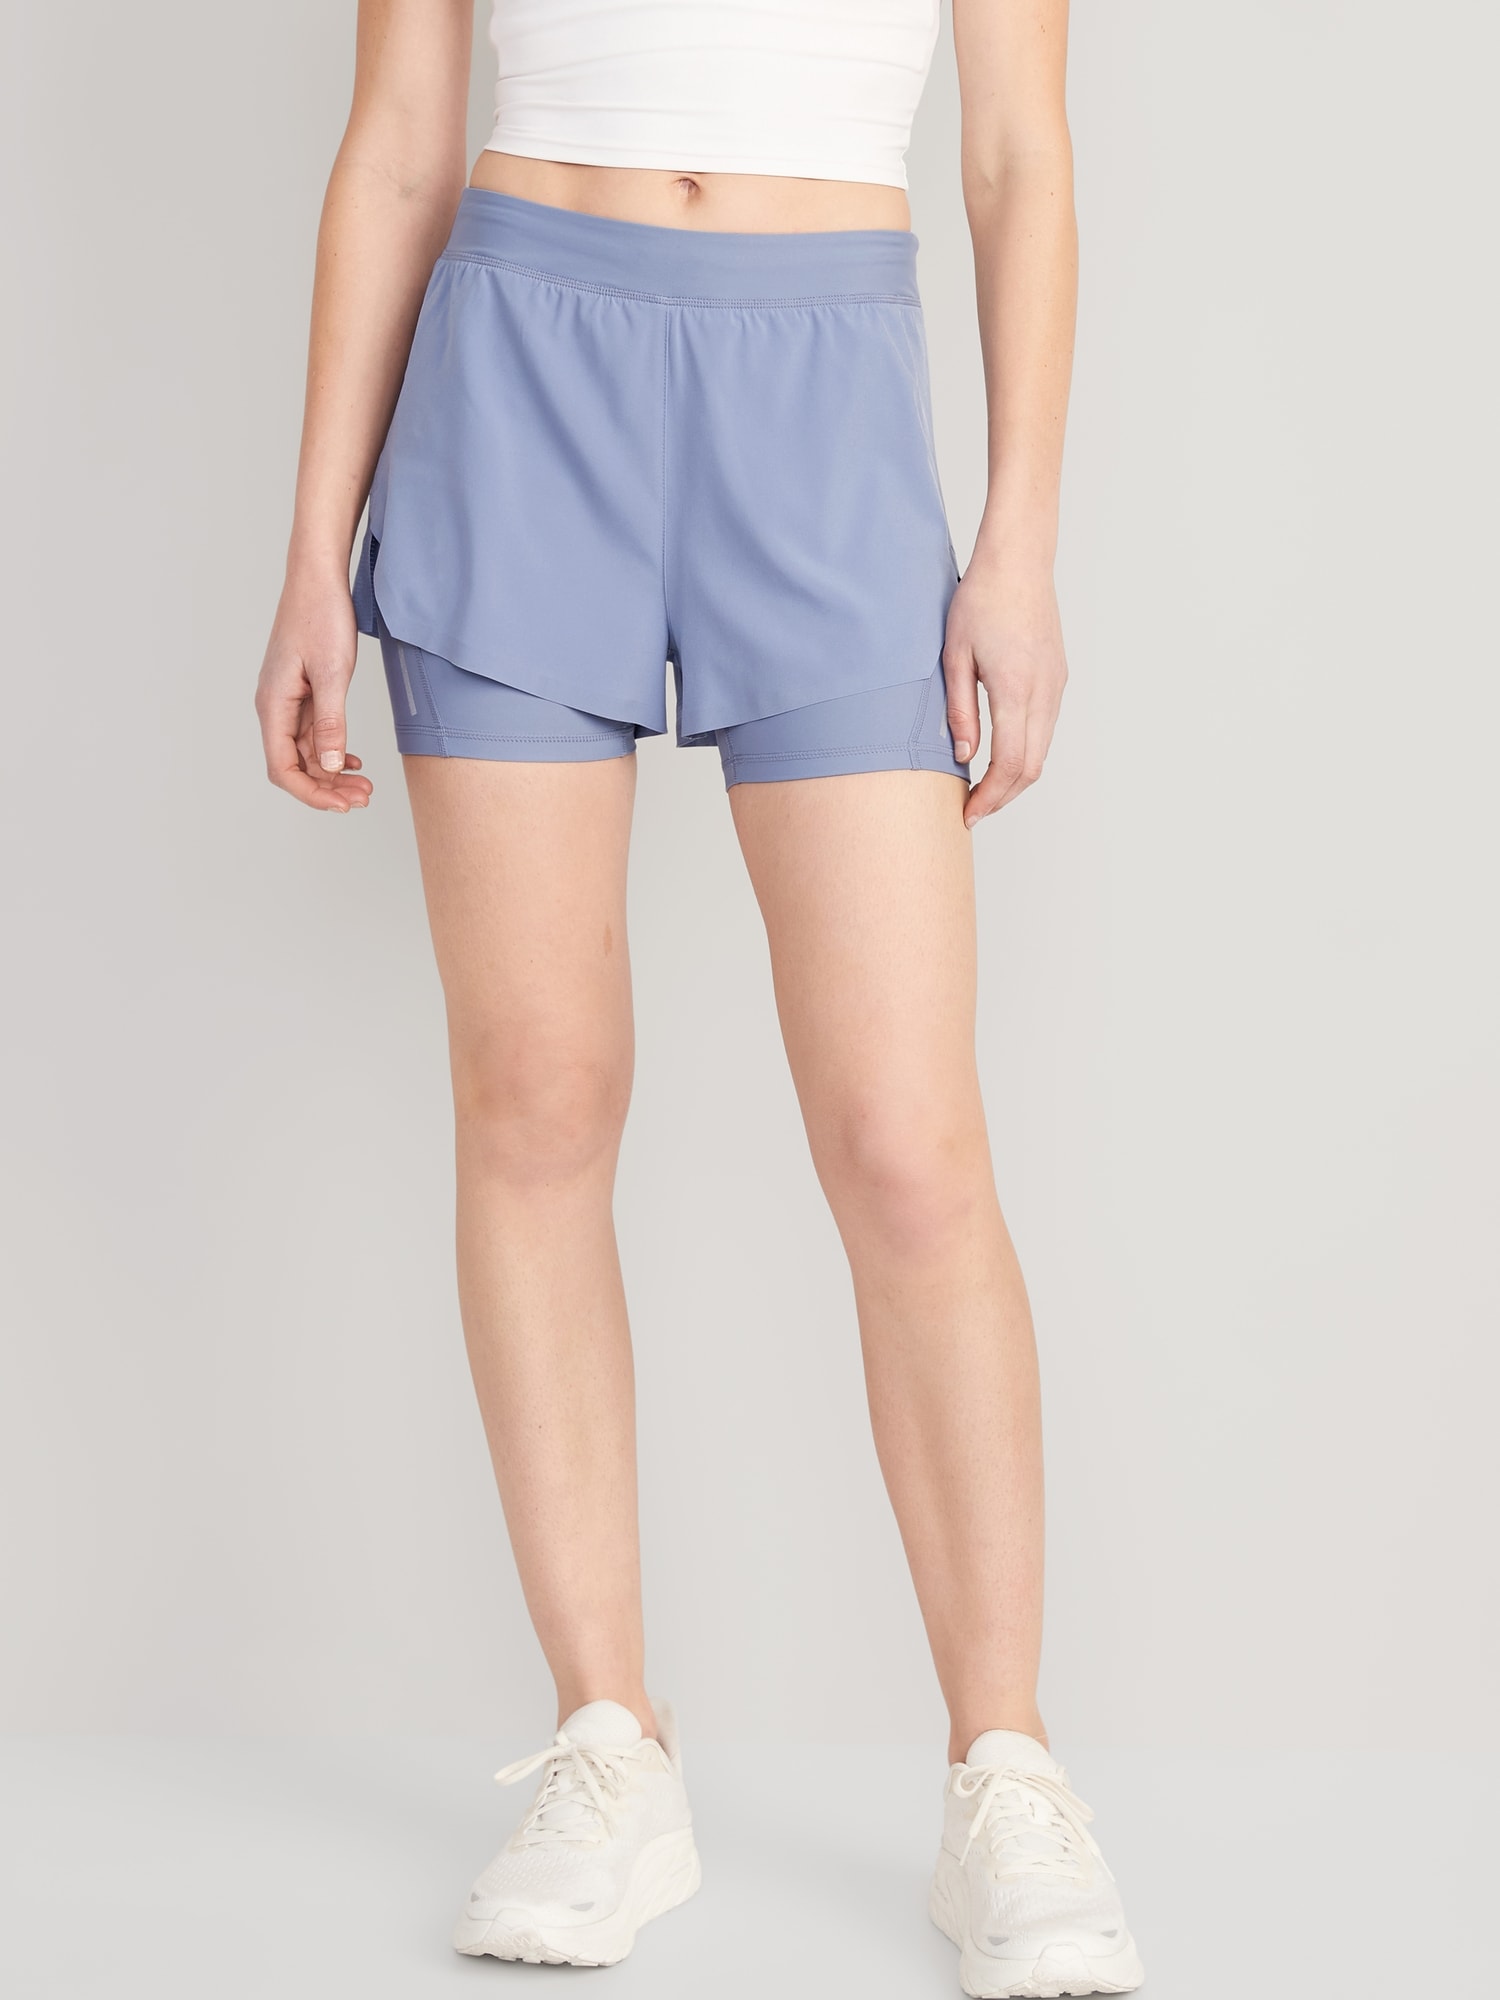 2-in-1 Shorts with tights, navy blue – SK SPORTKIND